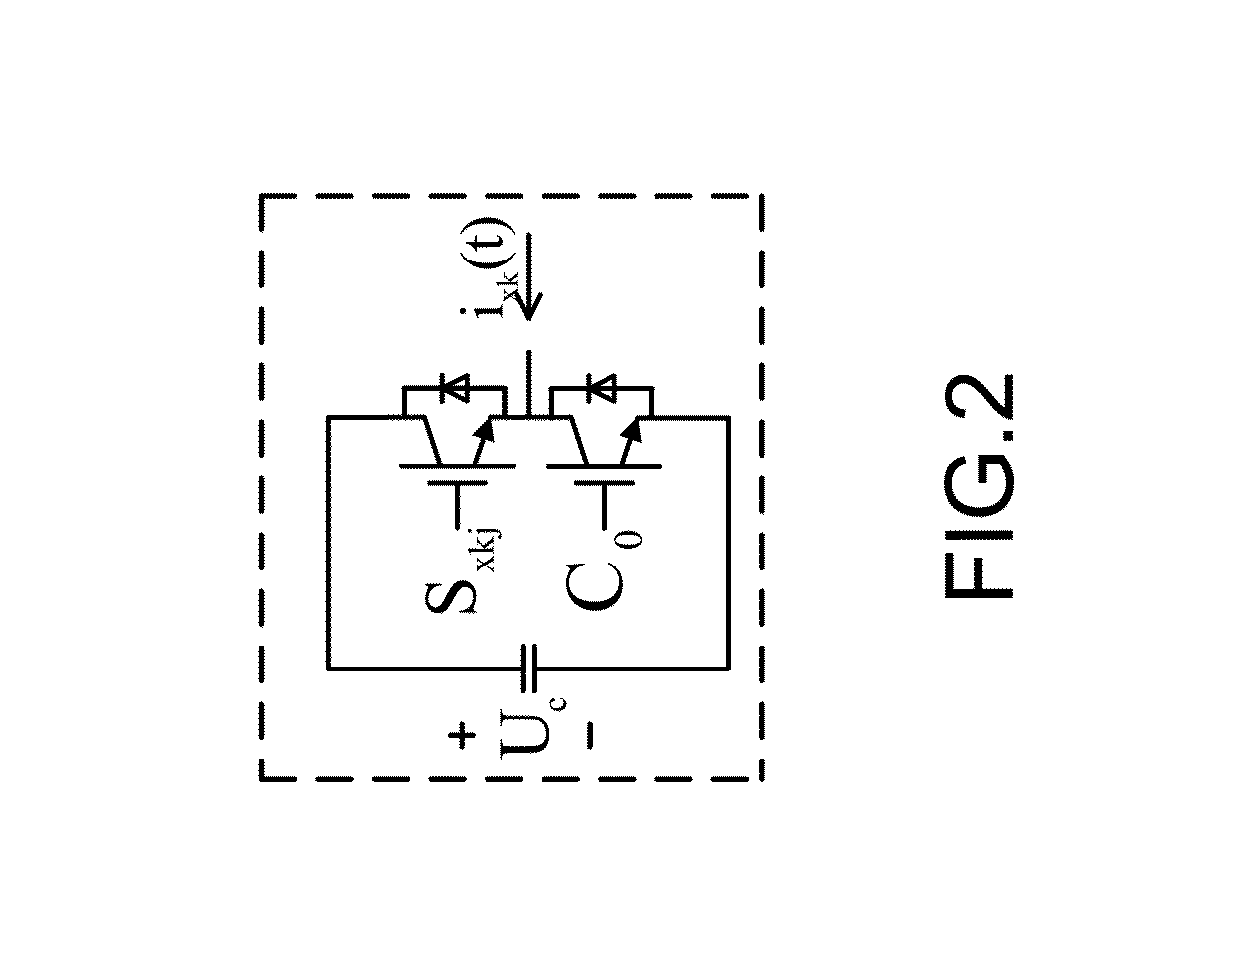 Method of current control of three-phase modular multilevel converter with inductance changes allowed